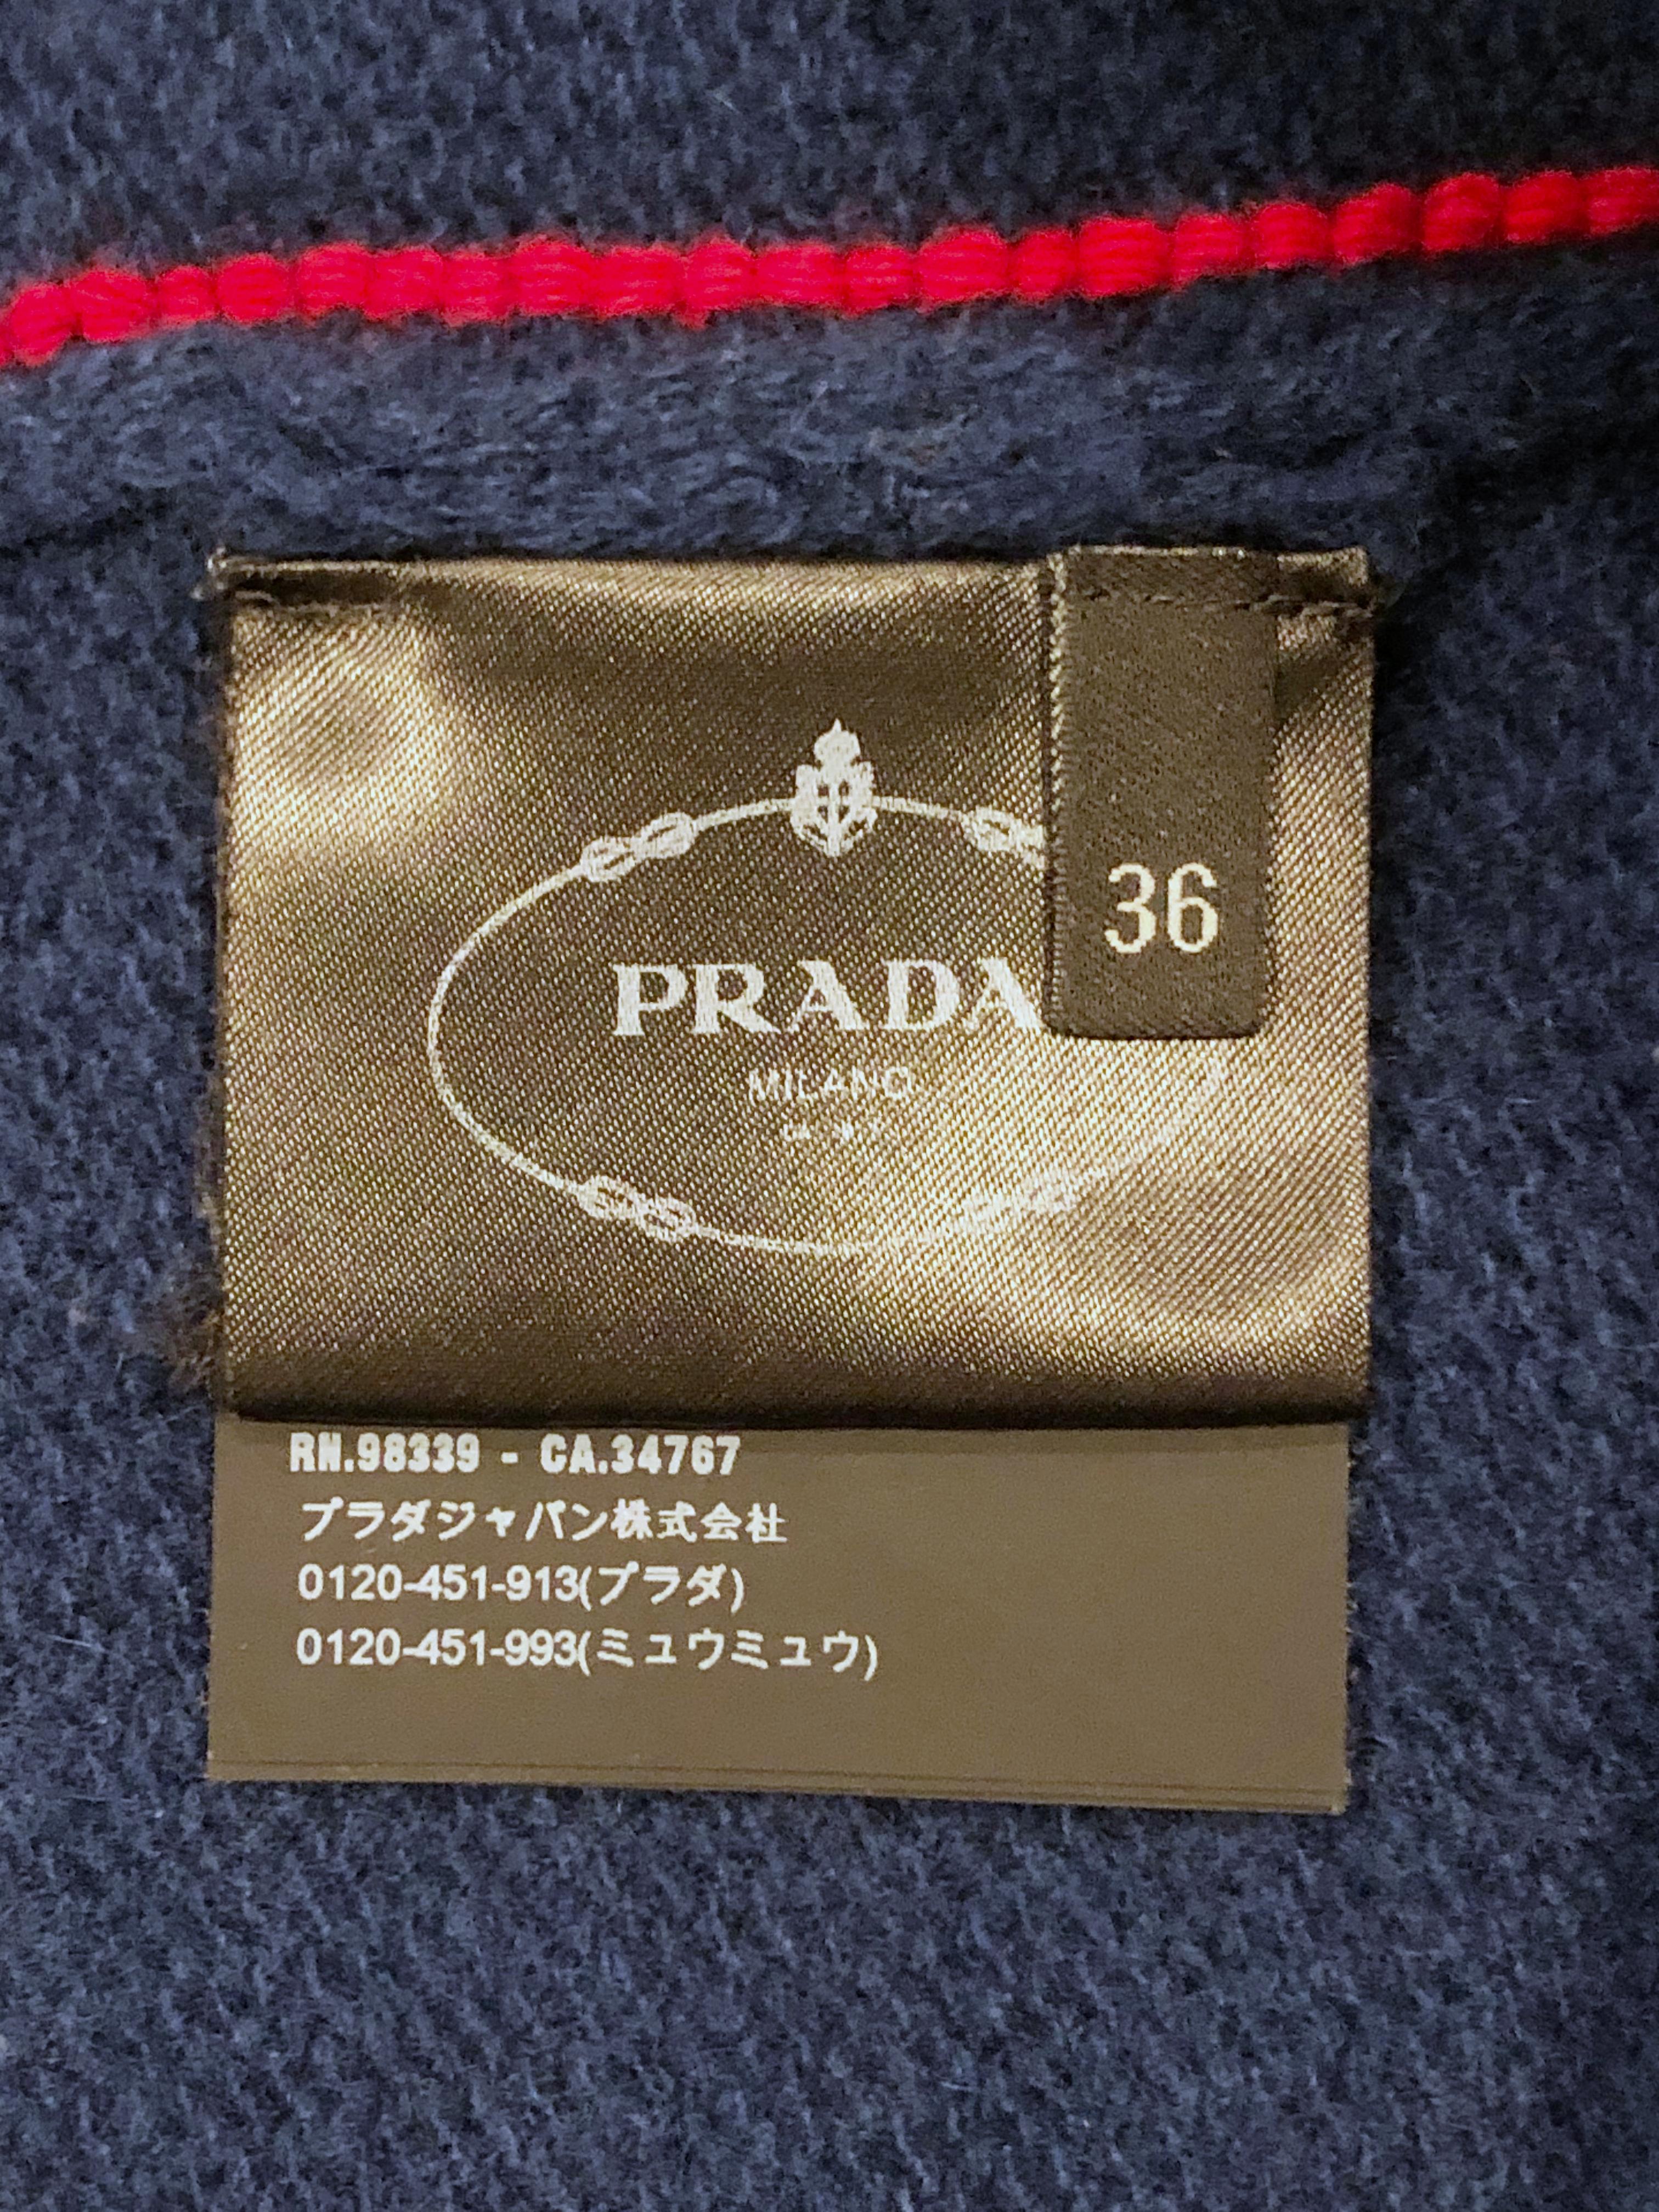 Women's PRADA Navy Cashmere Turtleneck with Red Piping Details